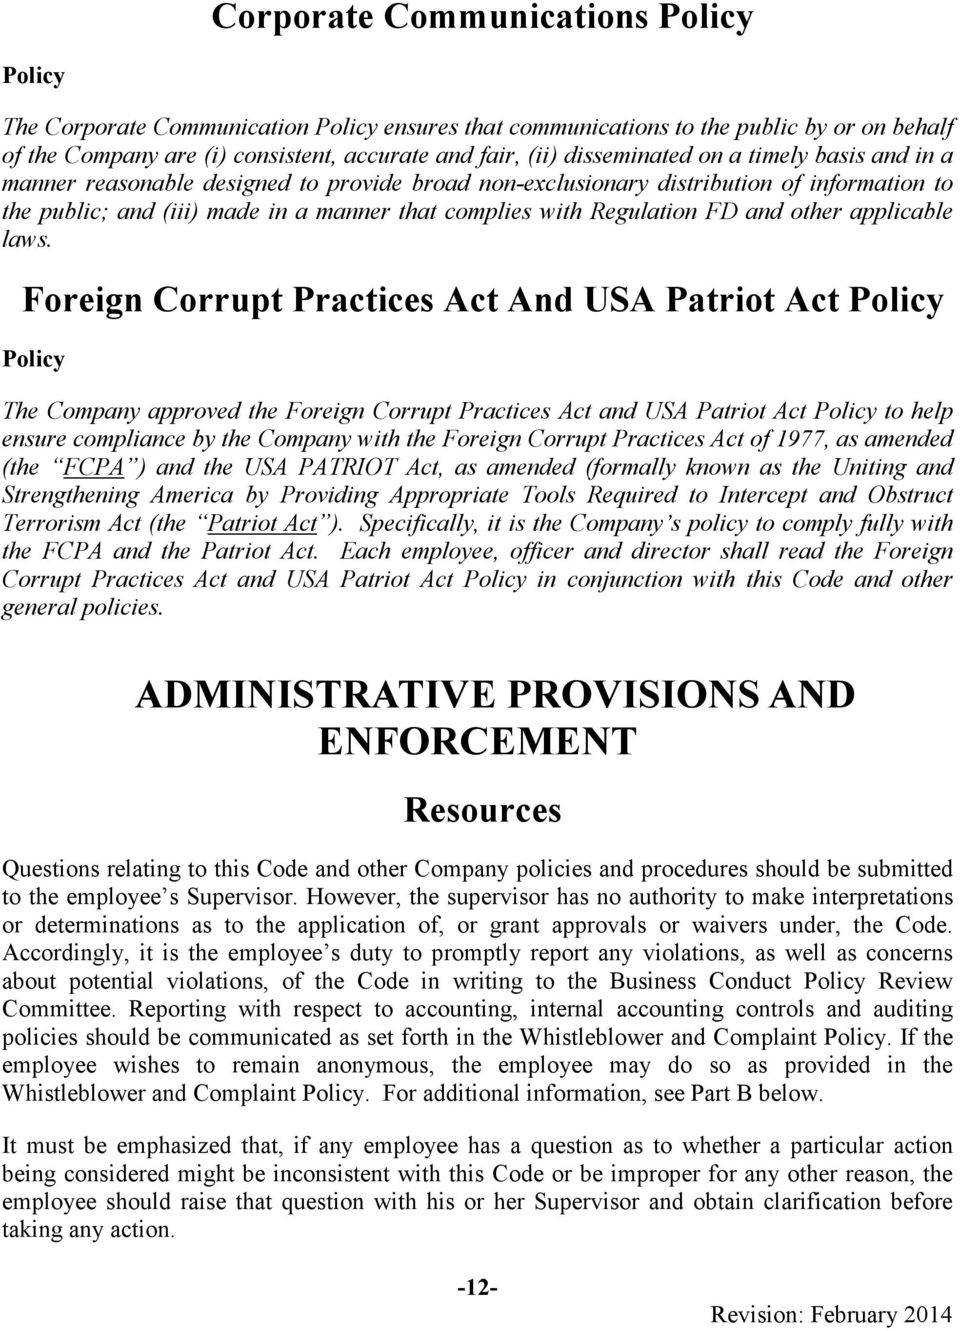 laws. Foreign Corrupt Practices Act And USA Patriot Act The Company approved the Foreign Corrupt Practices Act and USA Patriot Act to help ensure compliance by the Company with the Foreign Corrupt